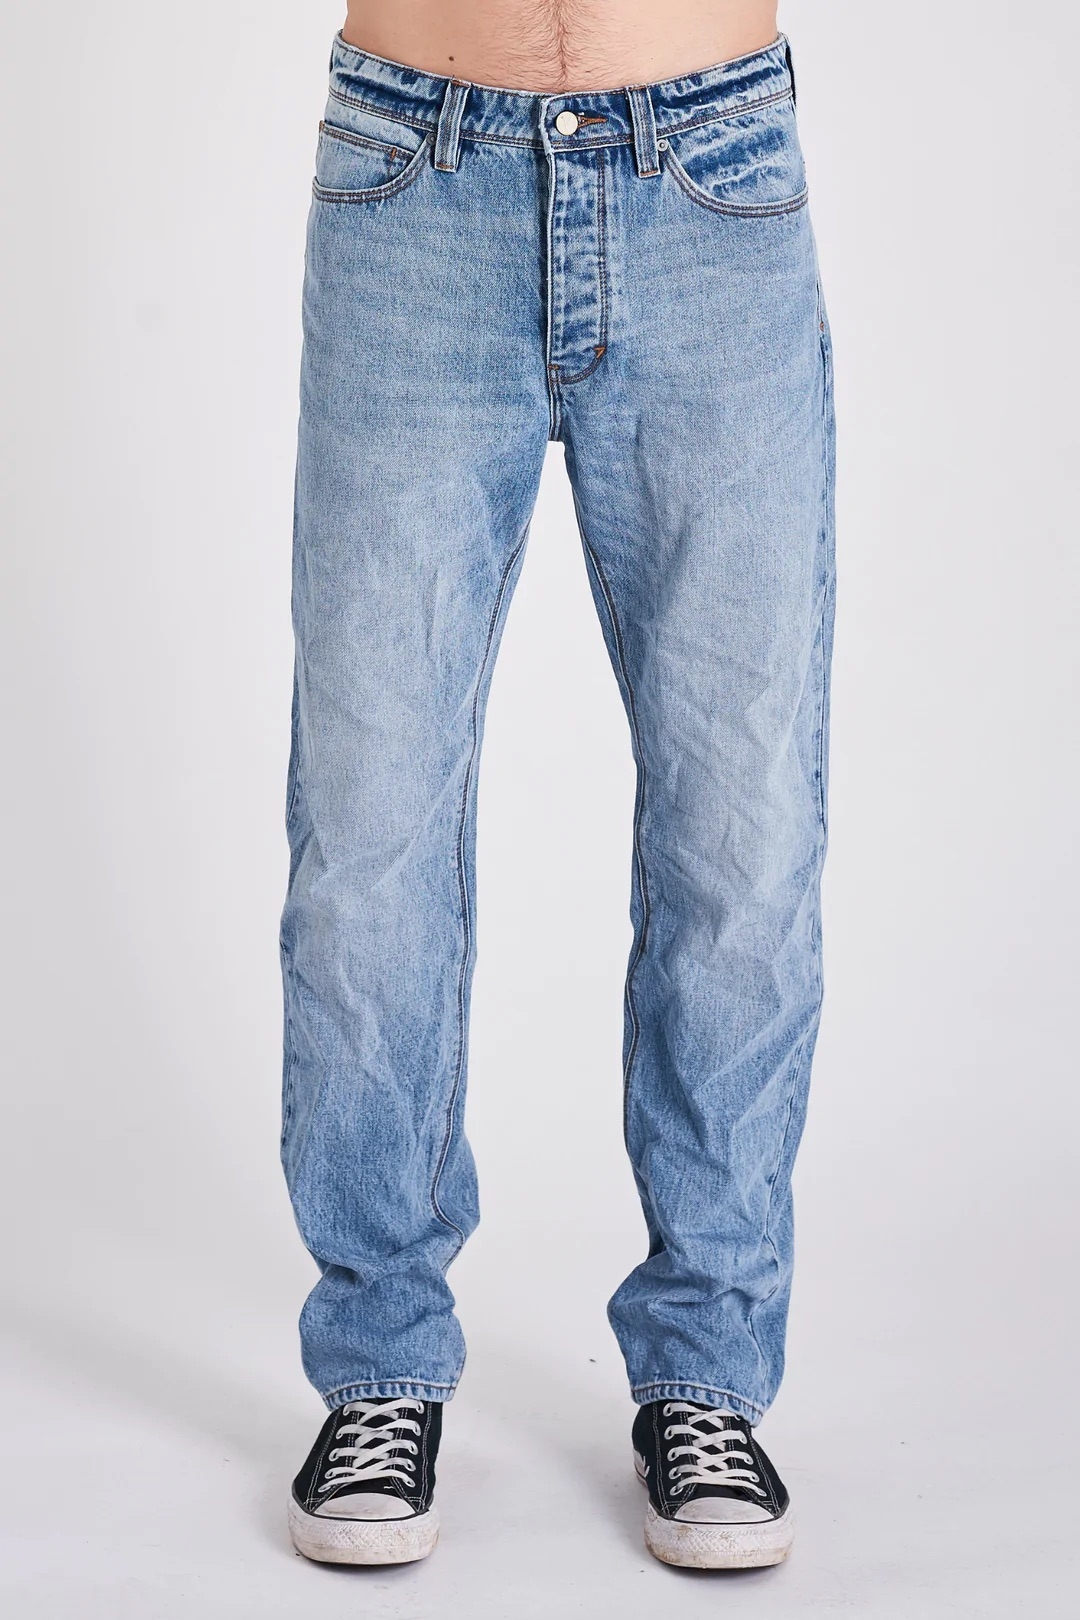 Abrand - A 90s Relaxed - Offworld Blue - Mens-Bottoms : We stock the ...